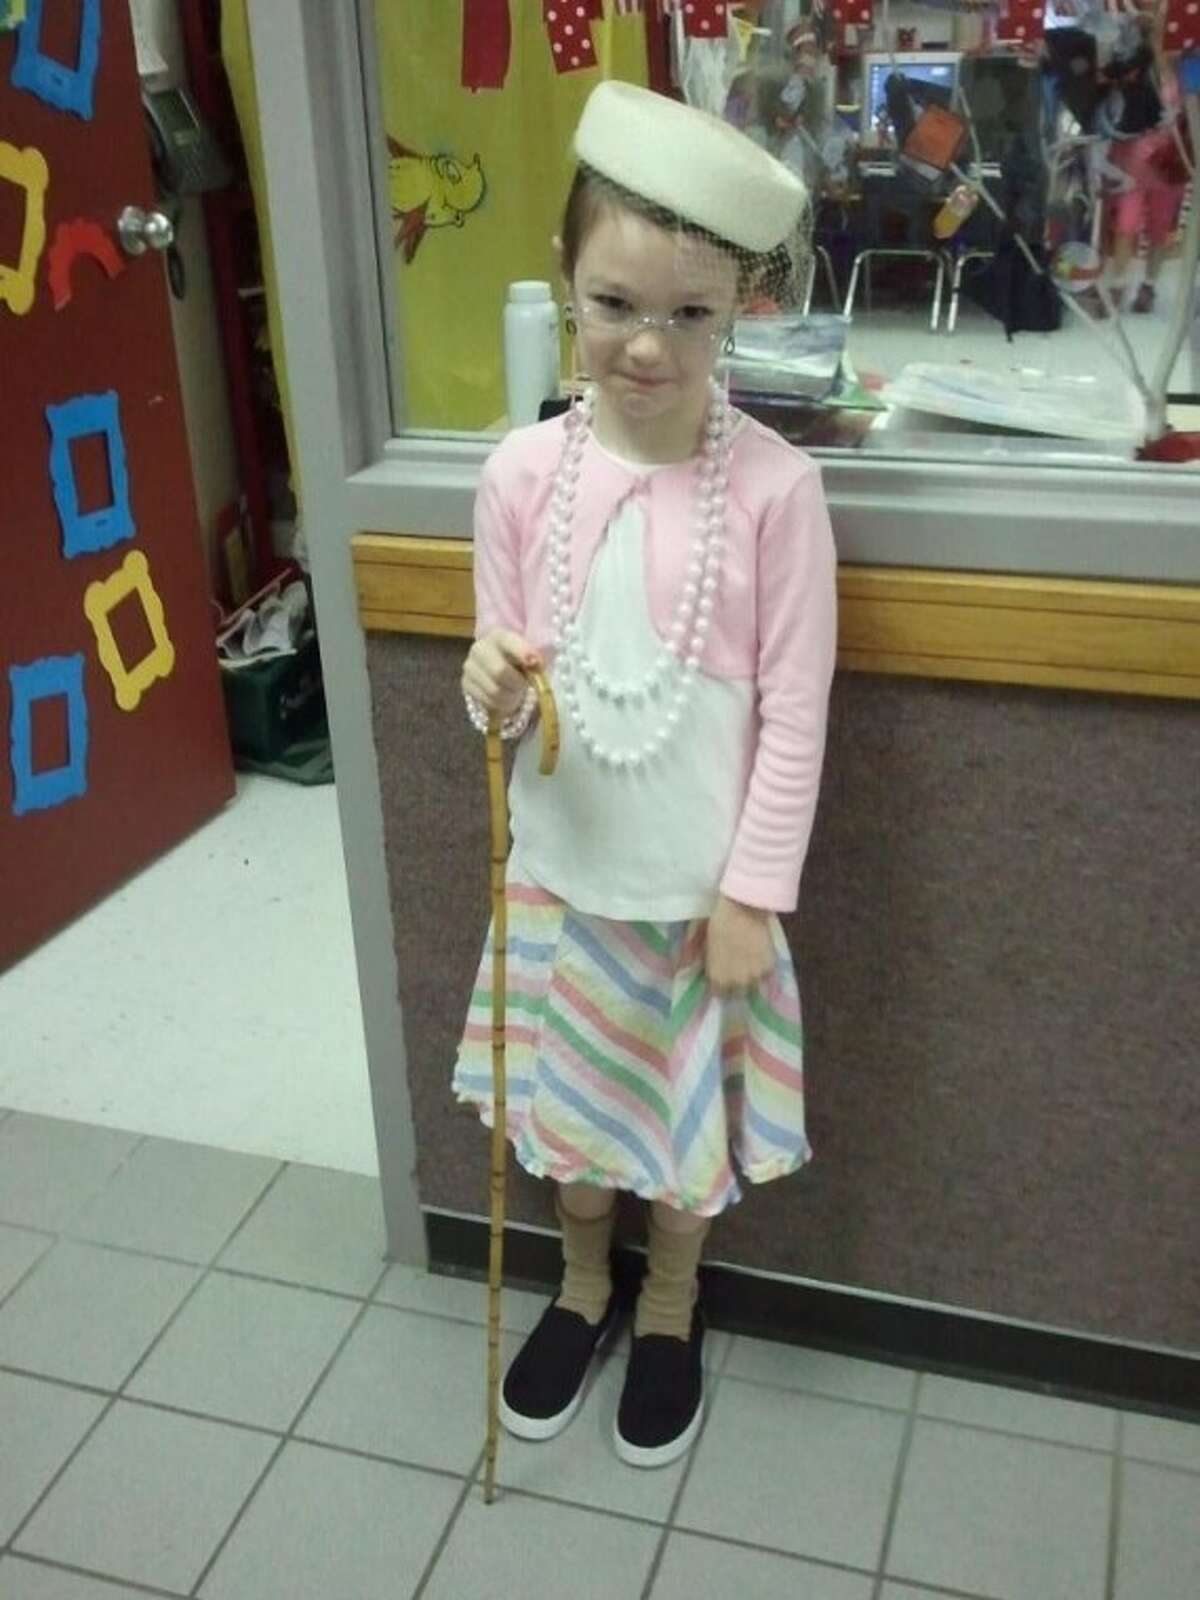 Geisinger Elementary celebrated its 100th day of school Feb. 1. Kindergarteners were asked to dress up as 100-year-olds. Pictured is Brooklyn Spikes, who is in Ashley Kahn’s class.